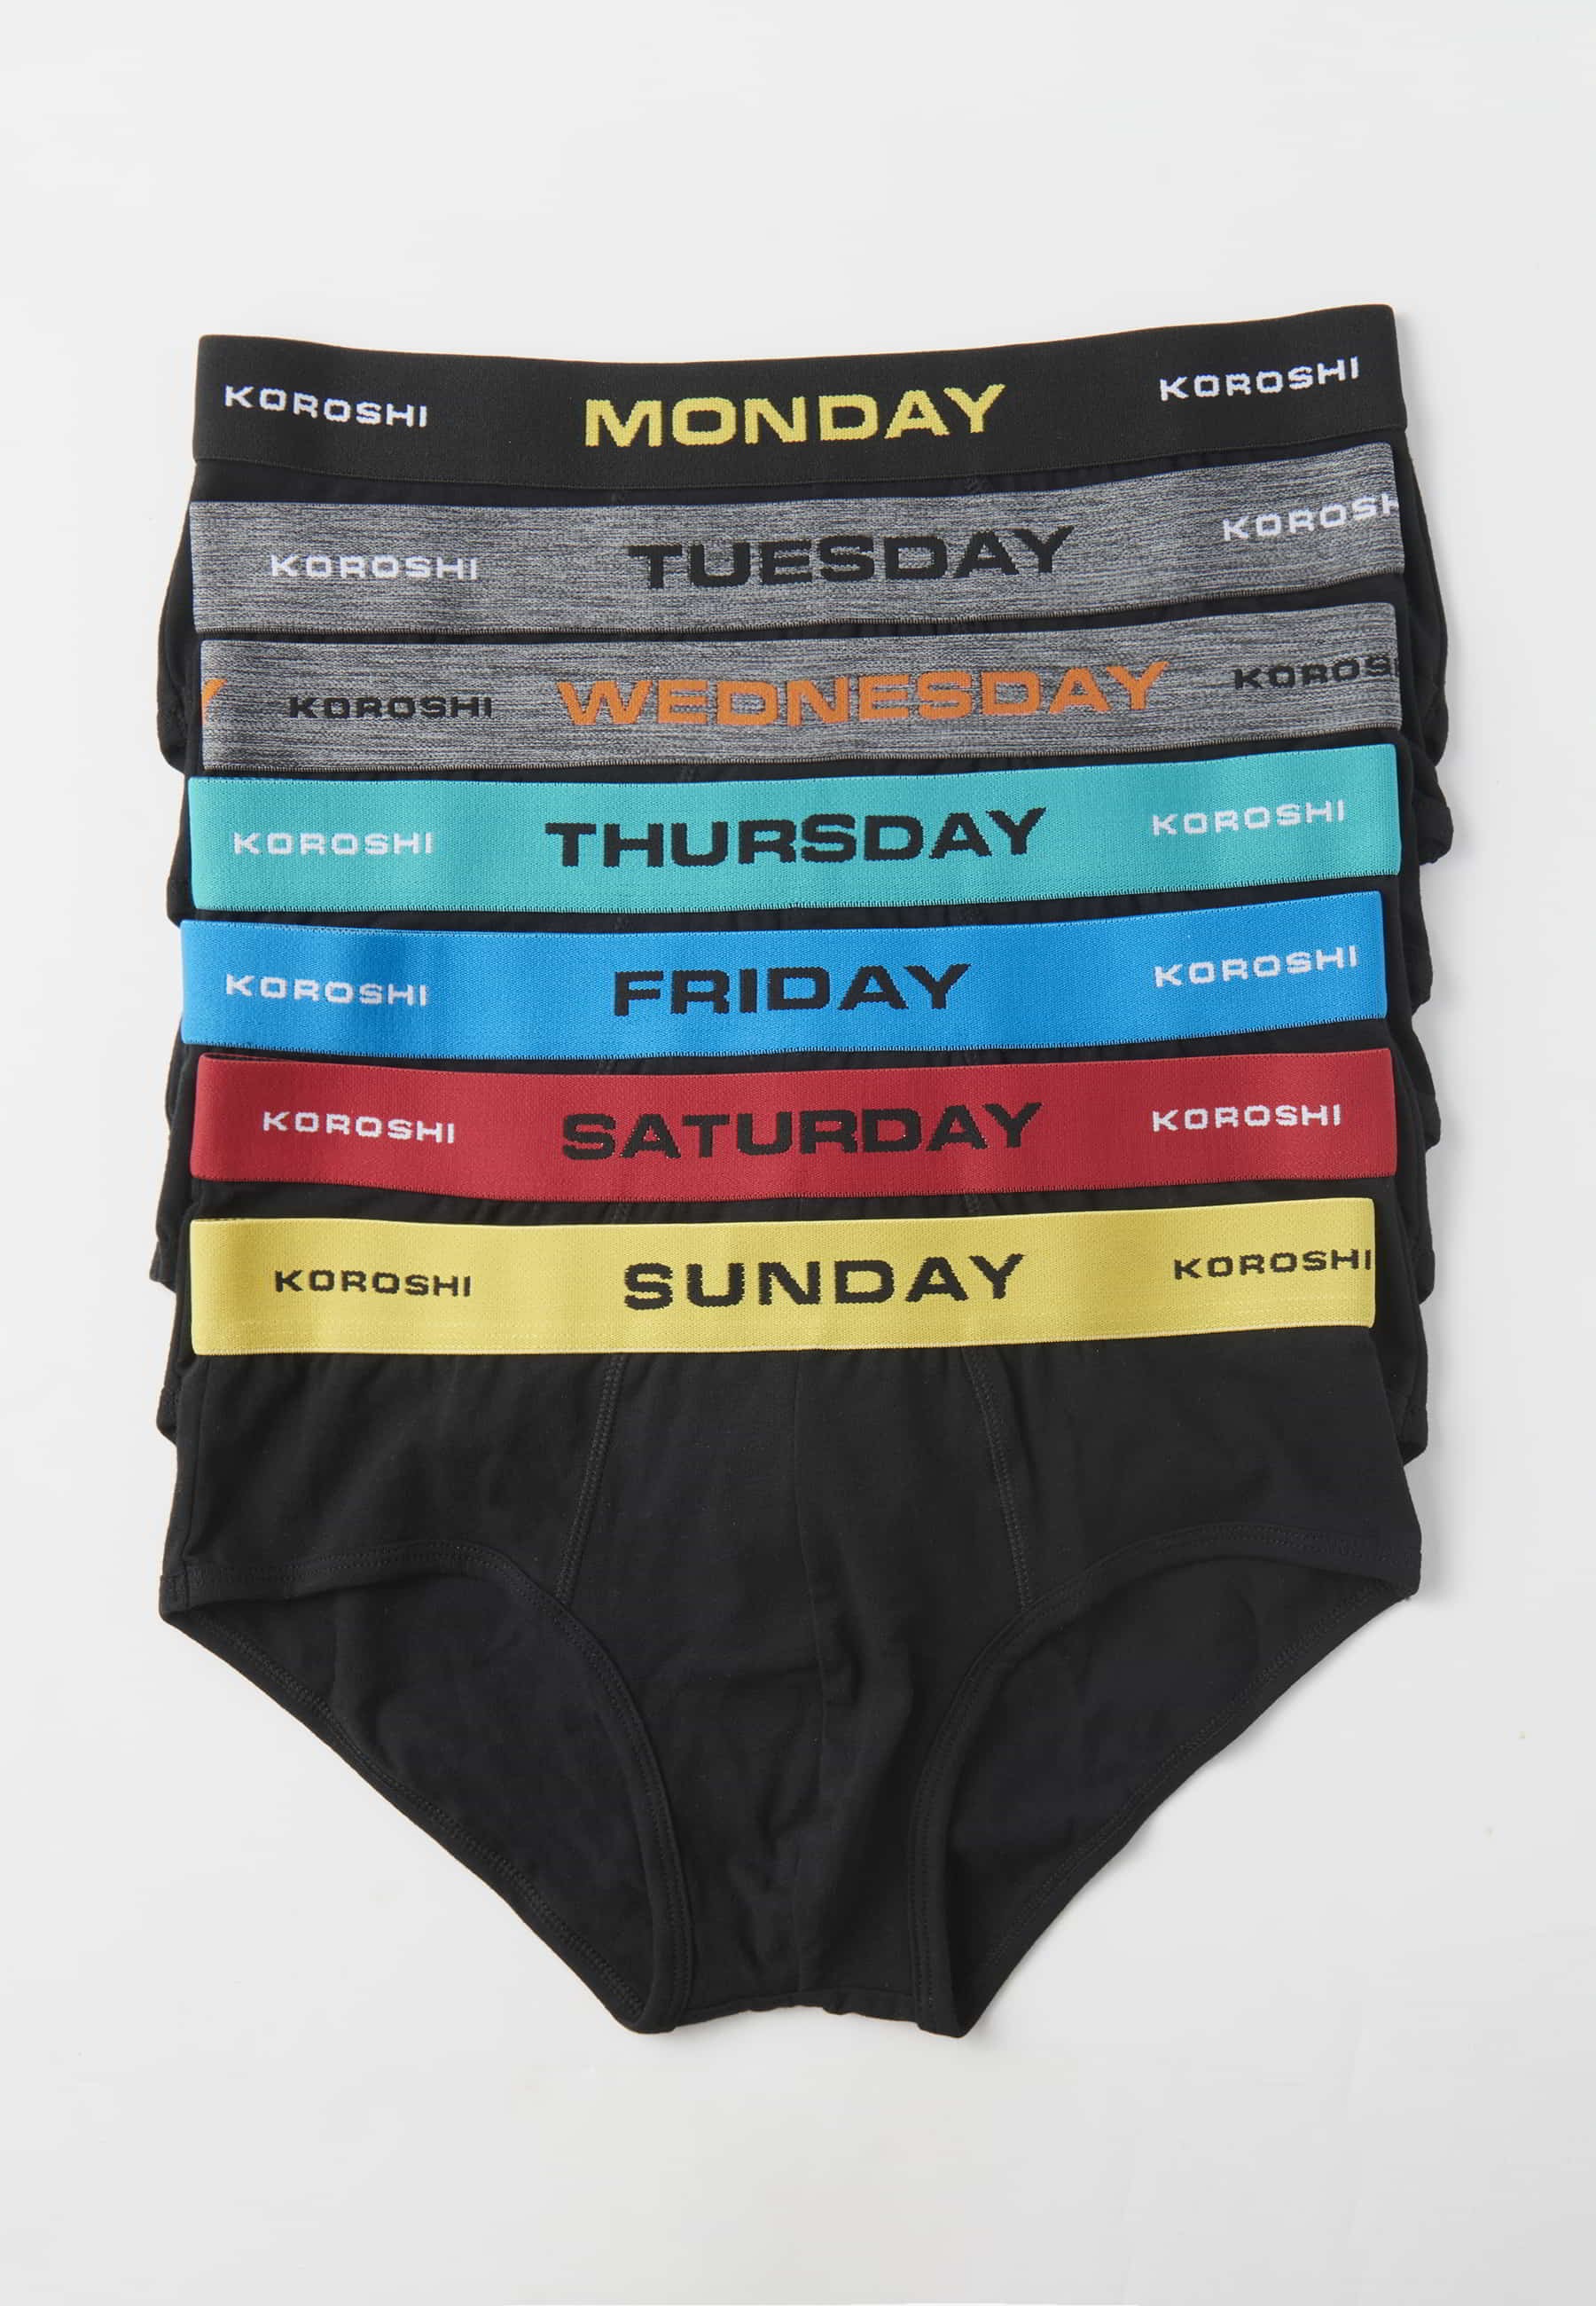 Pack of seven briefs in different colors, one for each day of the week, for Men